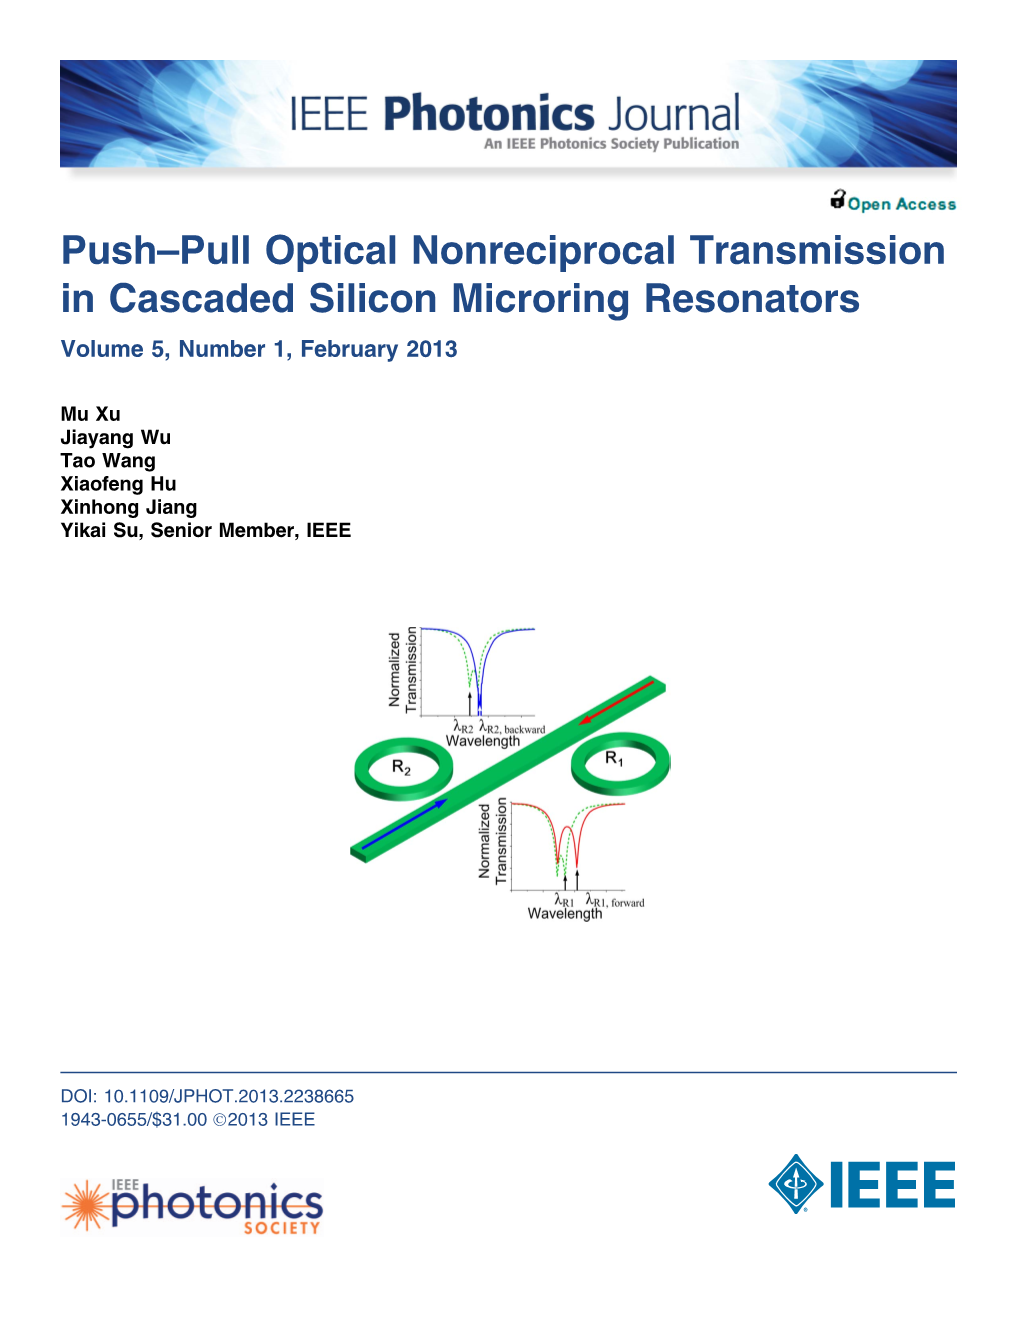 Push–Pull Optical Nonreciprocal Transmission in Cascaded Silicon Microring Resonators Volume 5, Number 1, February 2013